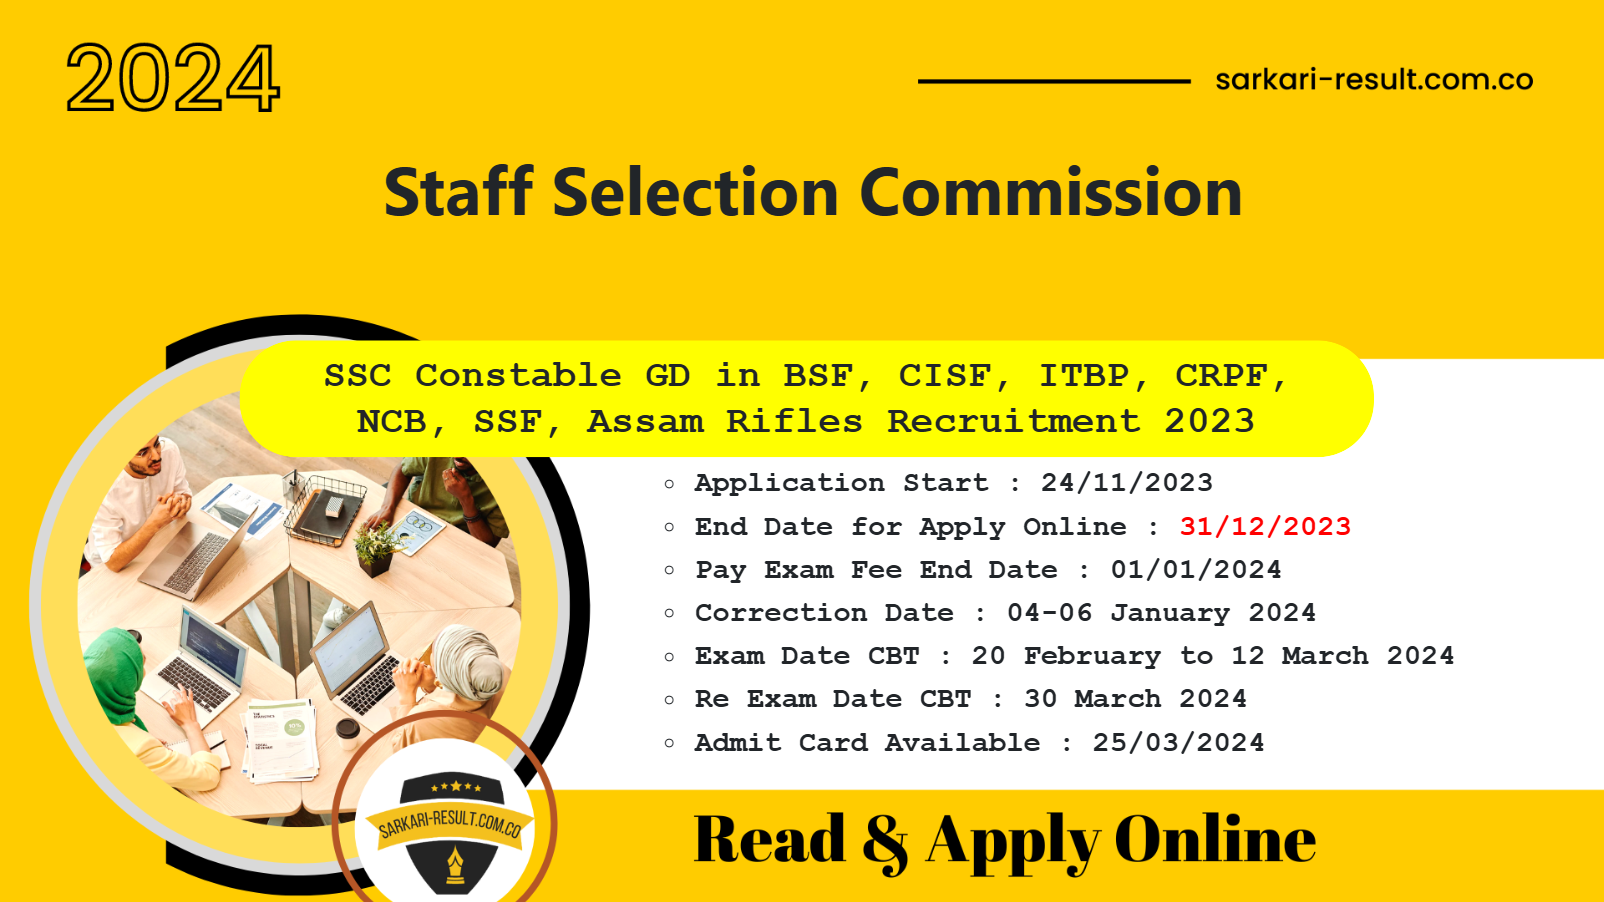 SSC GD Constable 2023 Result 2024 for 26146 Post